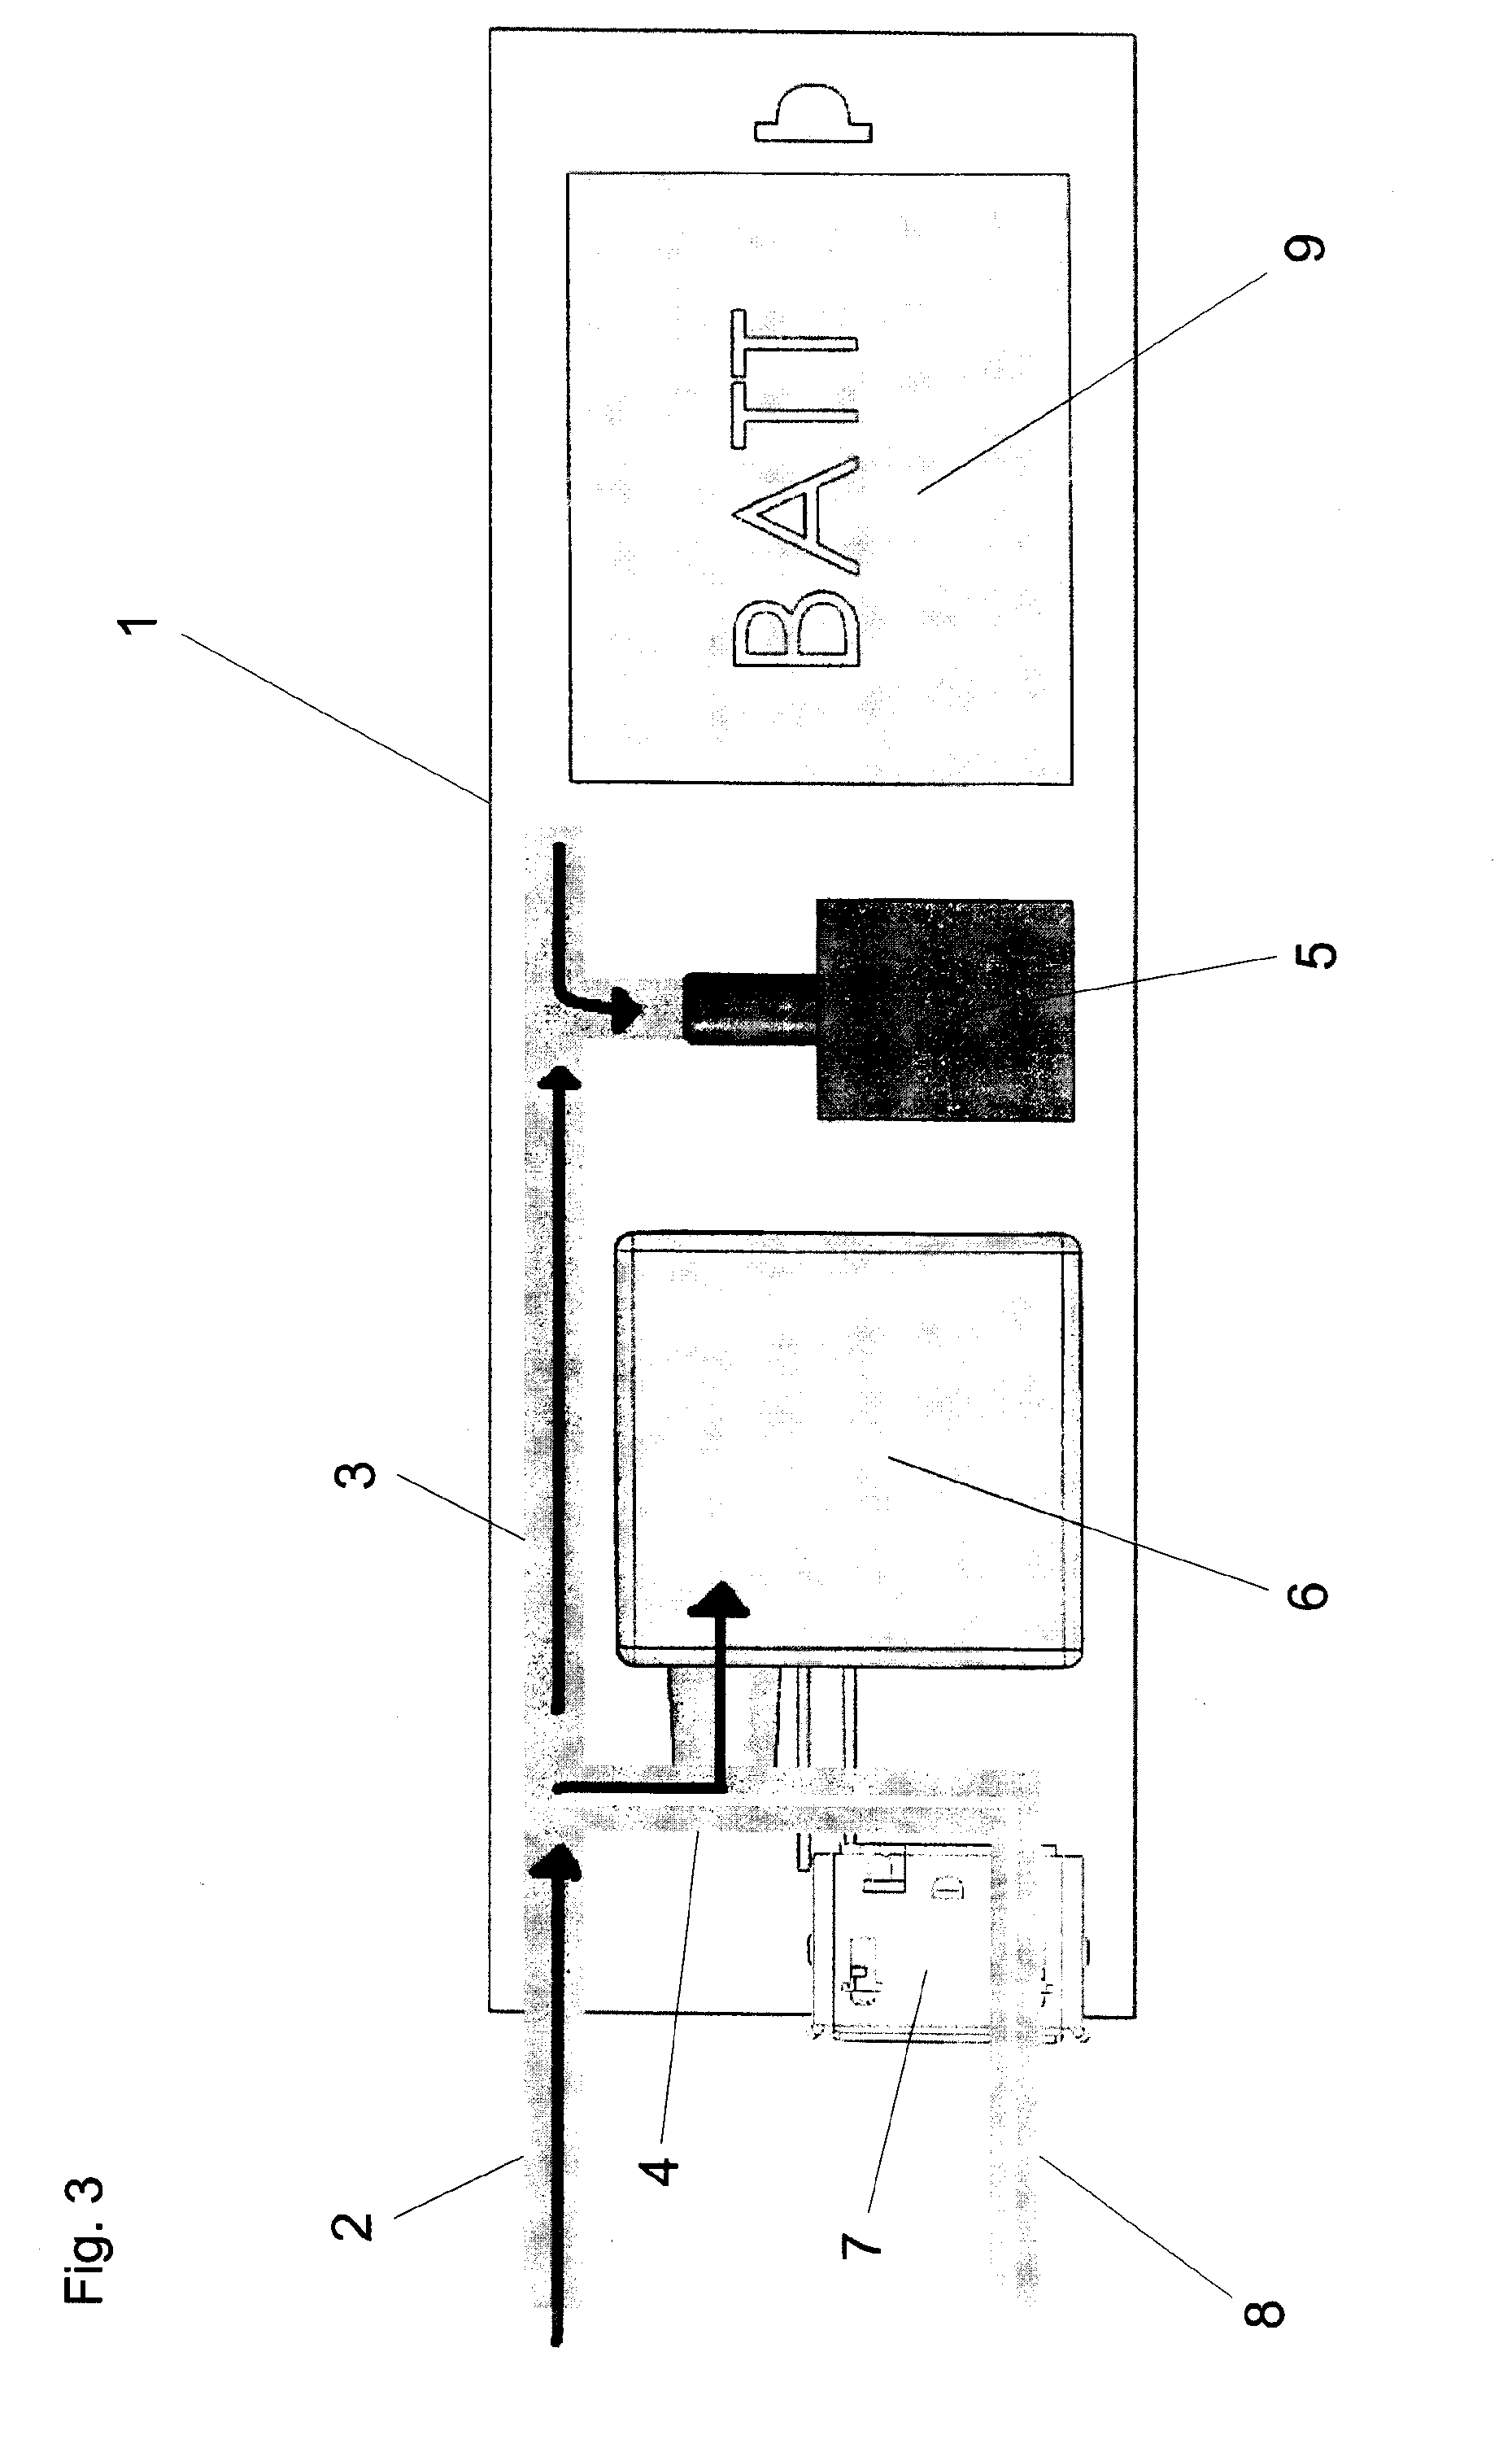 Method for measuring breath alcohol concentration and apparatus therefor